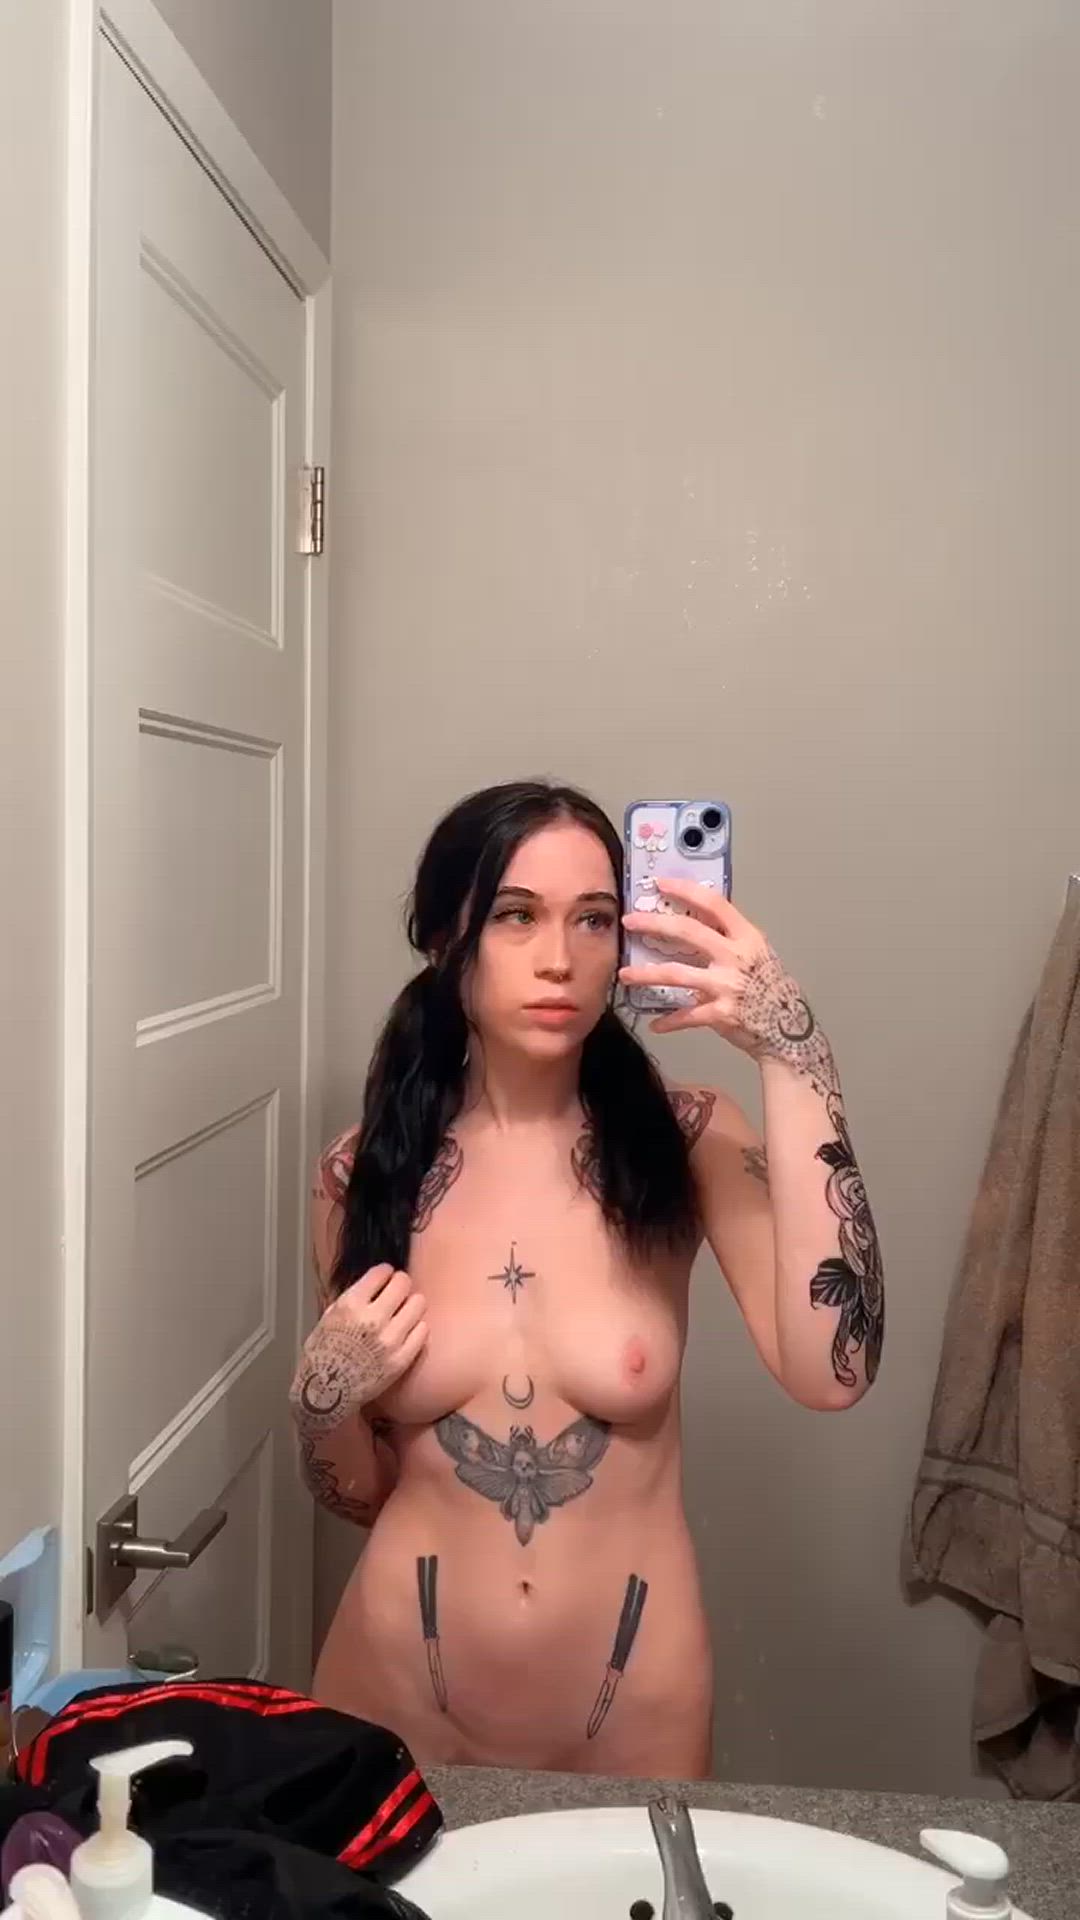 Ass porn video with onlyfans model honeypotx <strong>@honey_potx</strong>